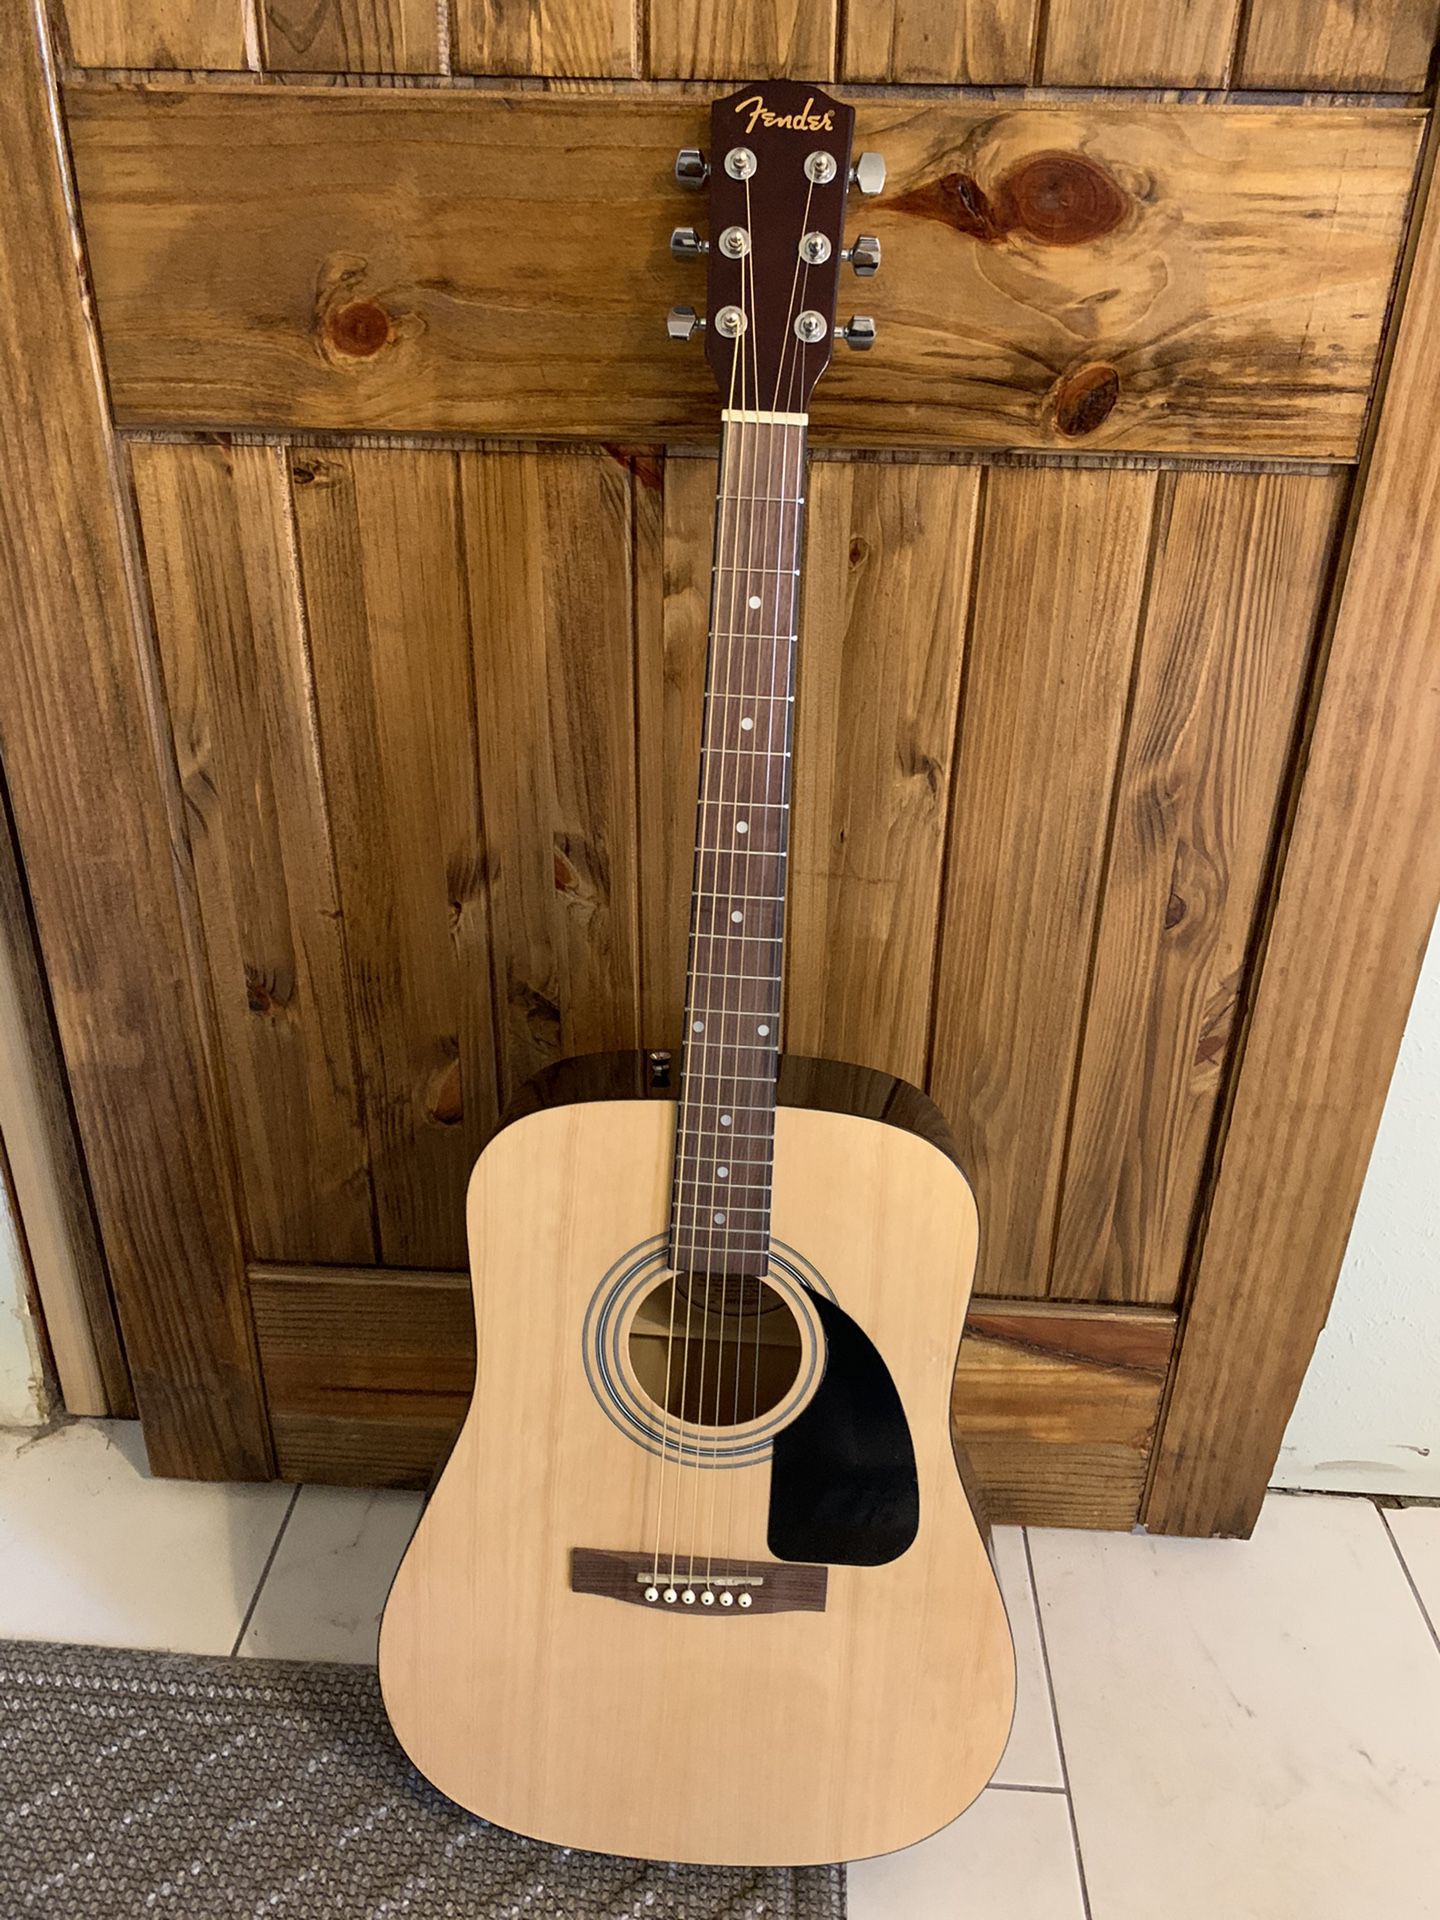 Fender FA-115 Acoustic Guitar with picks and capo